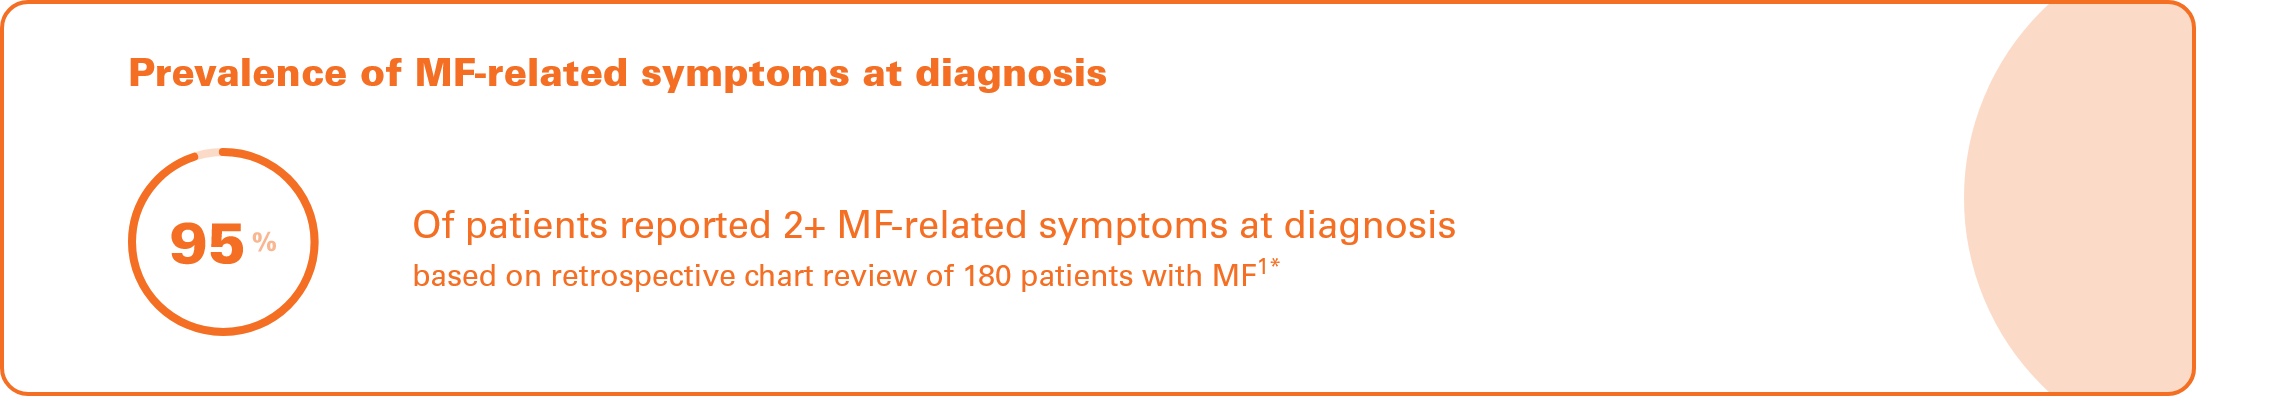 Image says Prevalence of MF-related symptoms at diagnosis